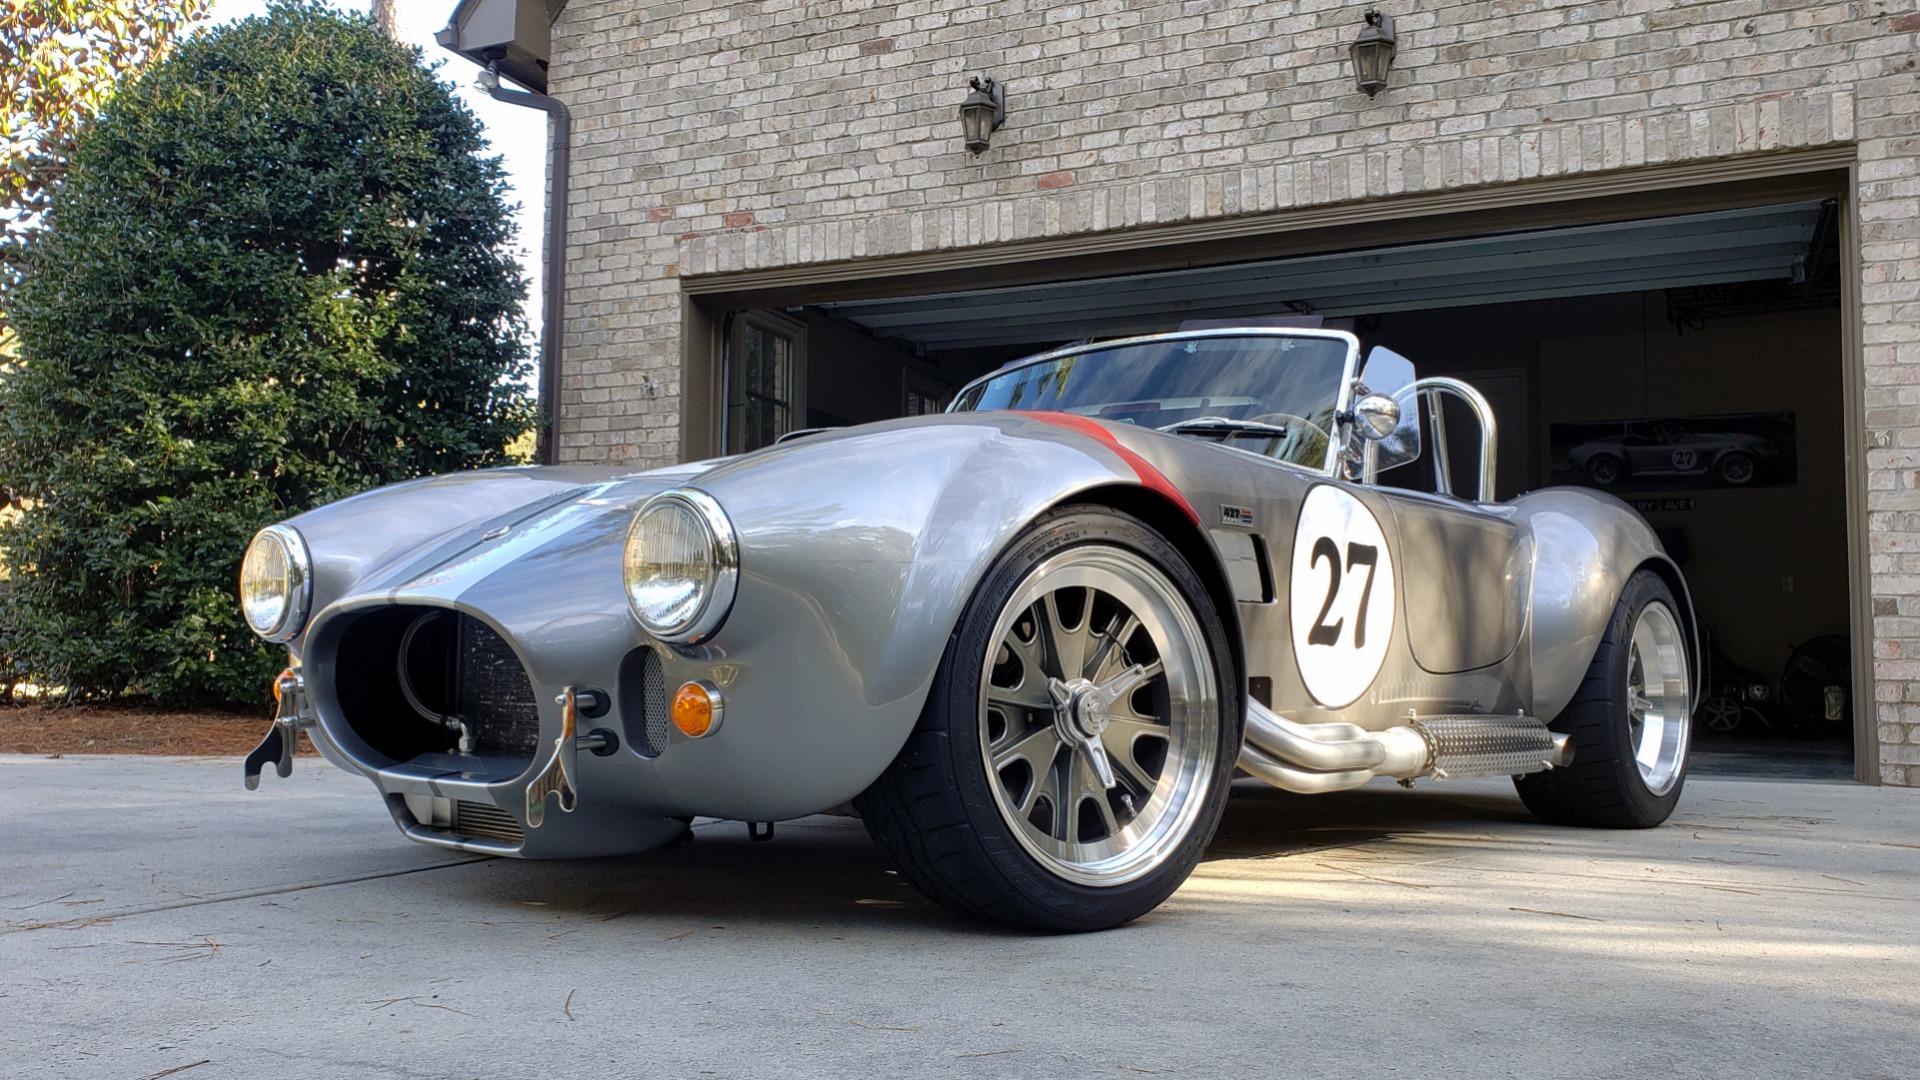 Used 1965 Ford COBRA 427 ROADSTER BY BACKDRAFT RACING ROUSH 553HP V8 / TREMEC 6-SPD / PWR STRNG for sale Sold at Formula Imports in Charlotte NC 28227 9